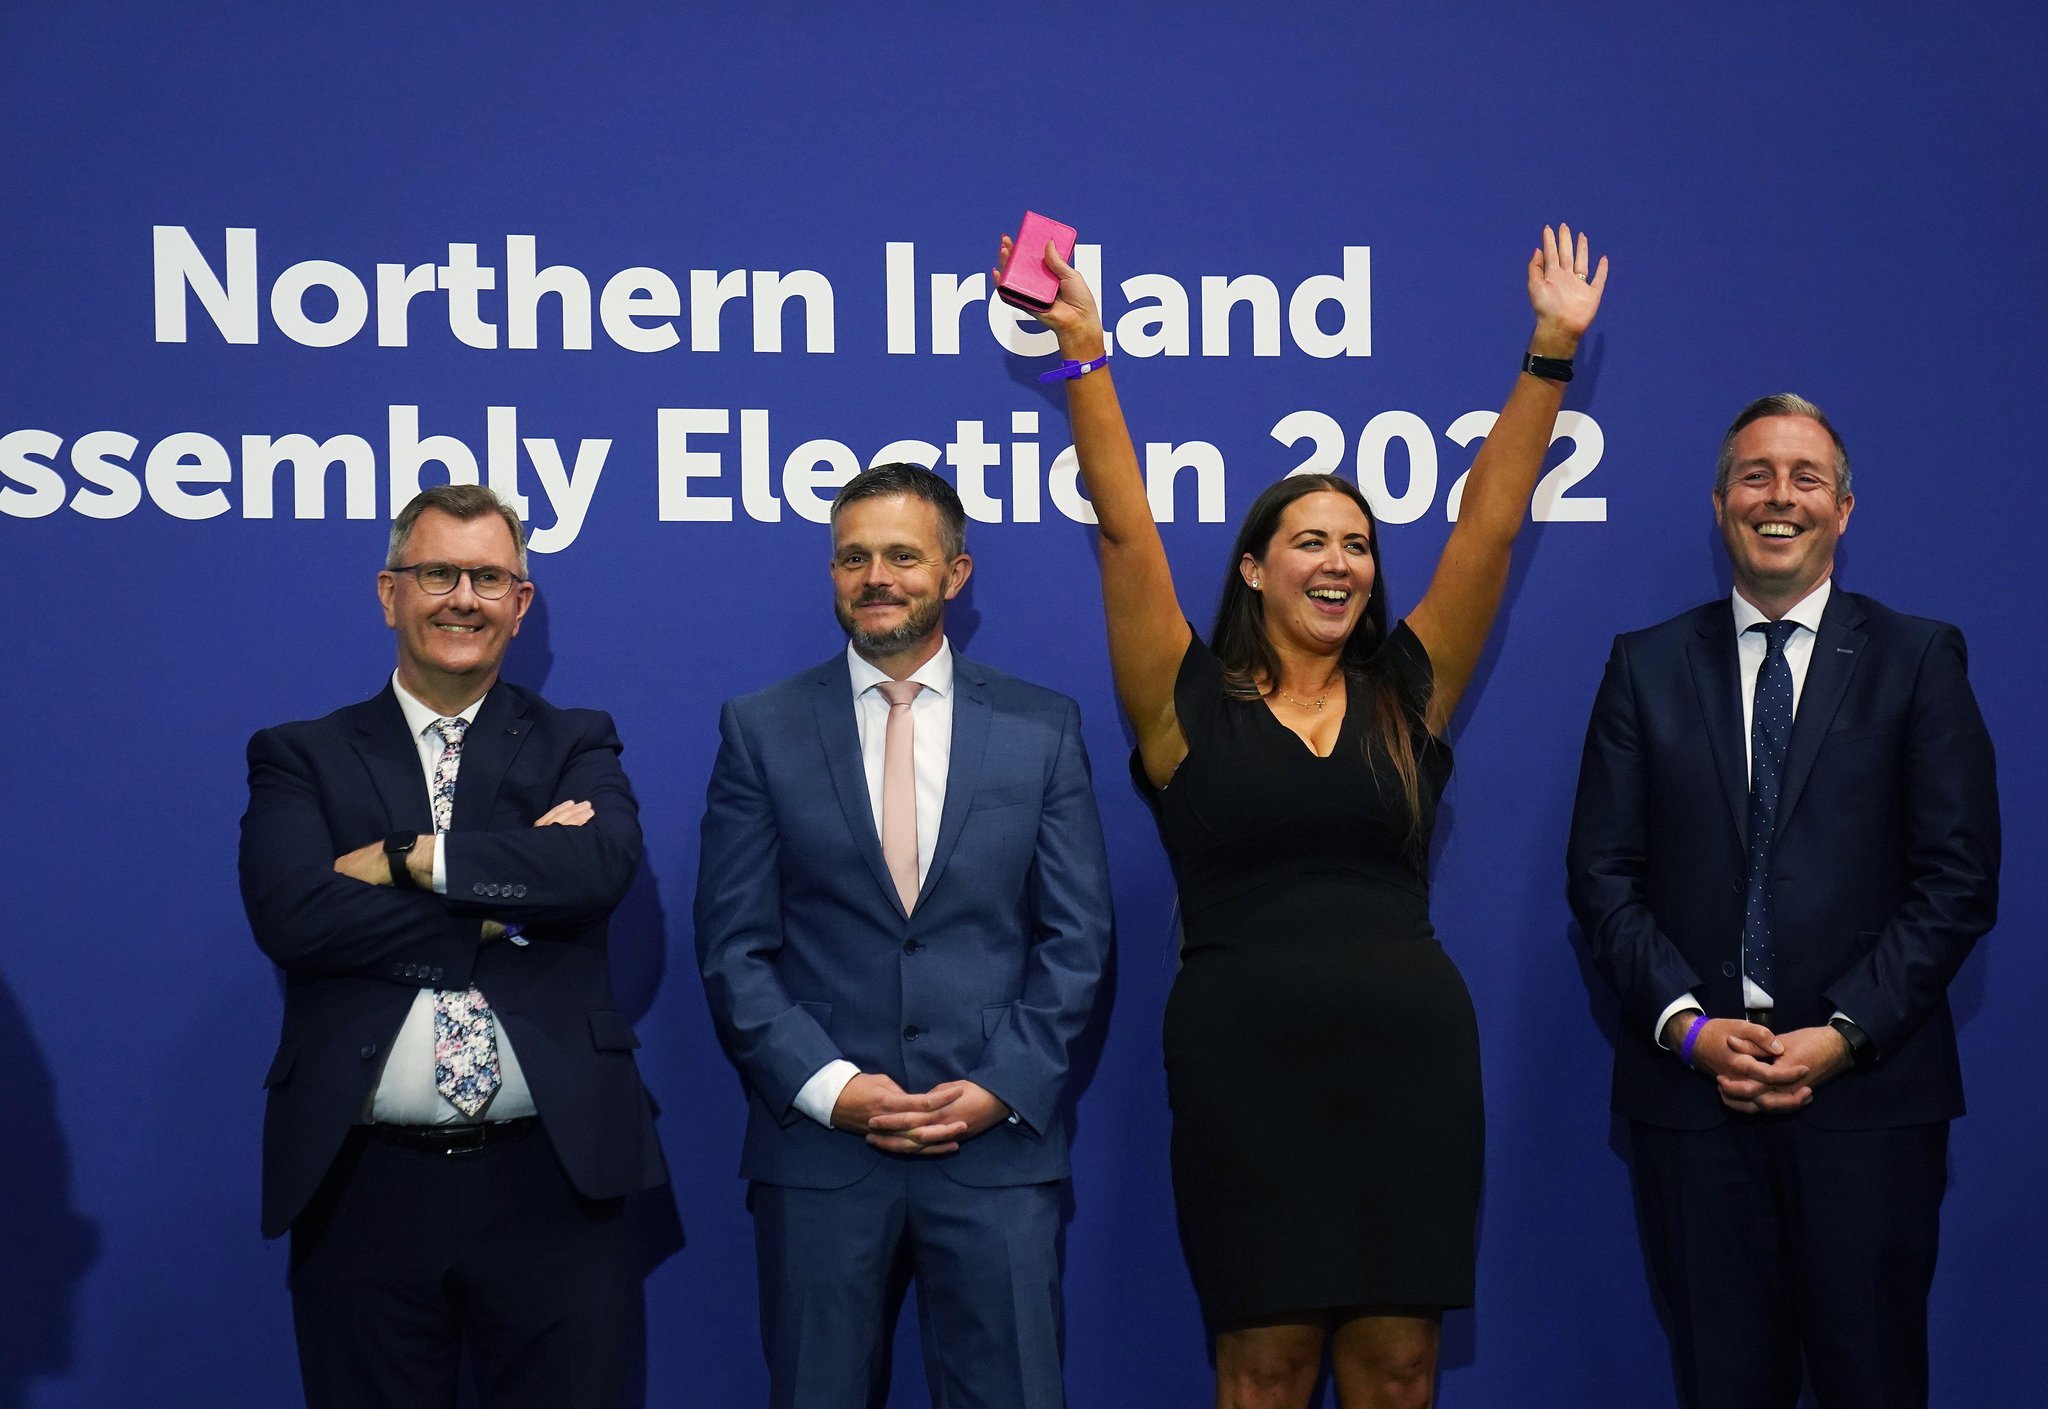 Counting resumes in Northern Ireland Assembly with Sinn Fein poised for historic victory &#8211; Sir Jeffrey Donaldson delivers a personal challenge to Boris Johnson to address outstanding issues around NI Protocol